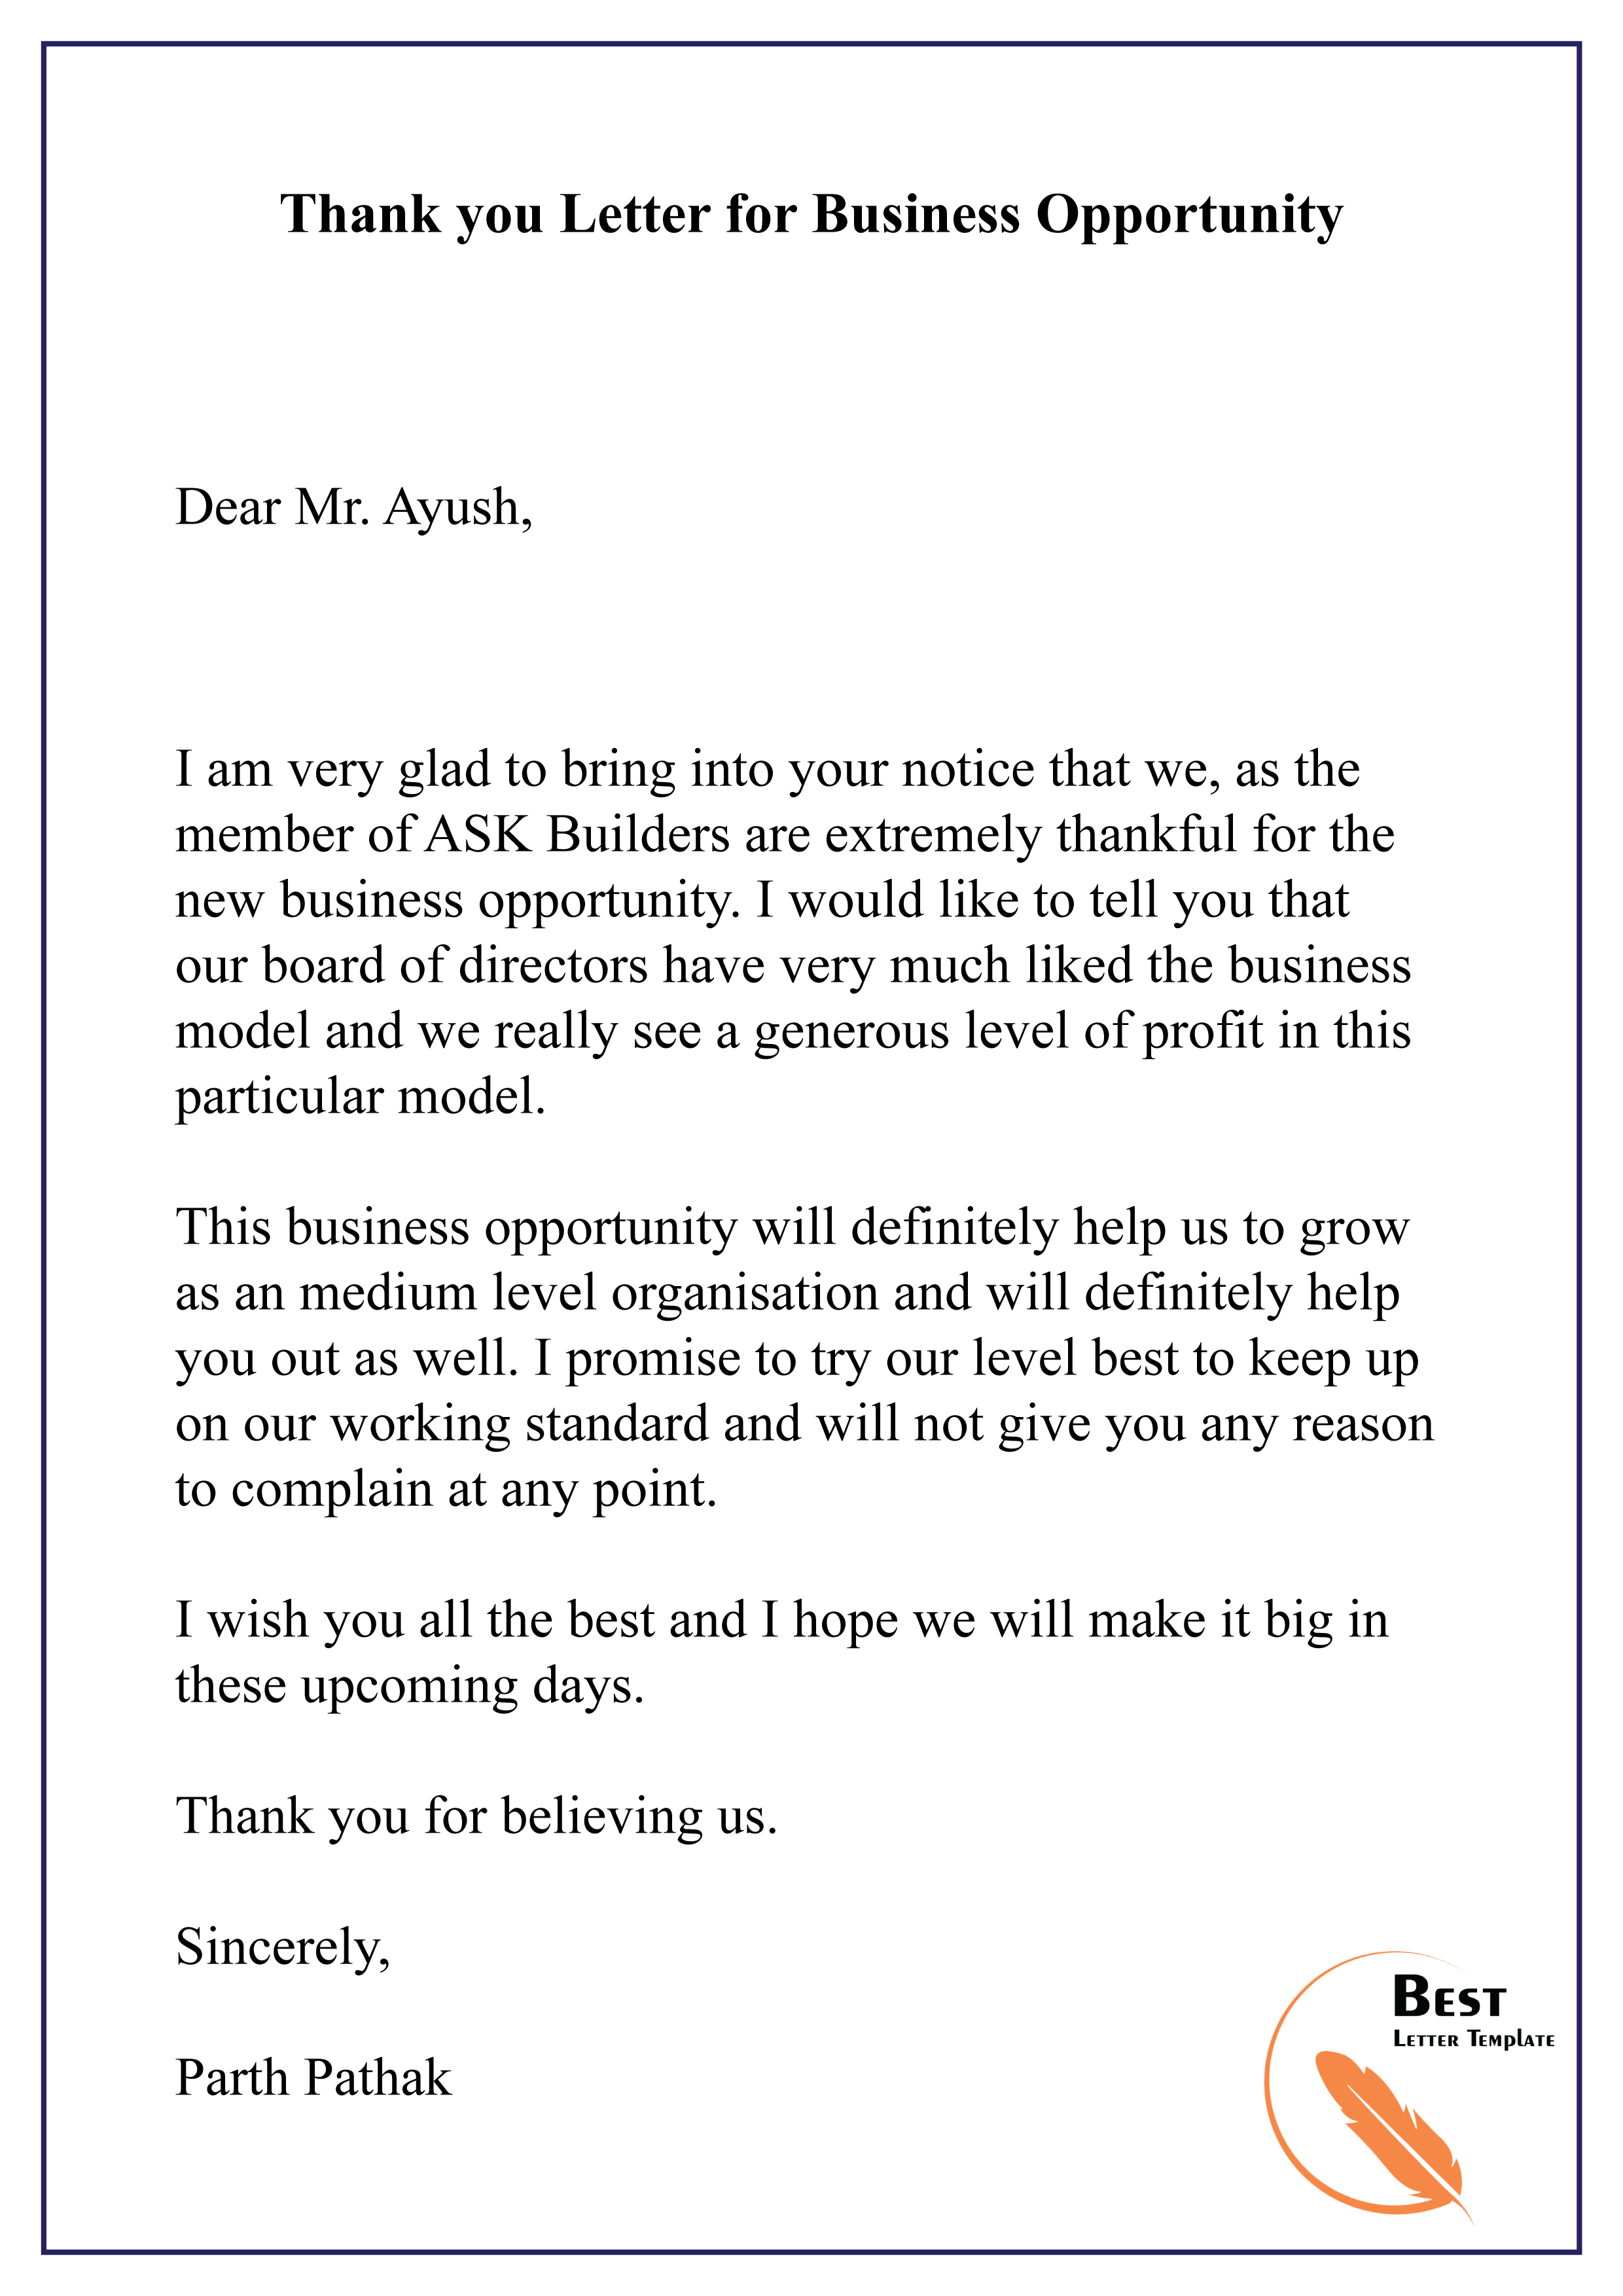 Thank you Letter for Business Opportunity-01 - Best Letter ...